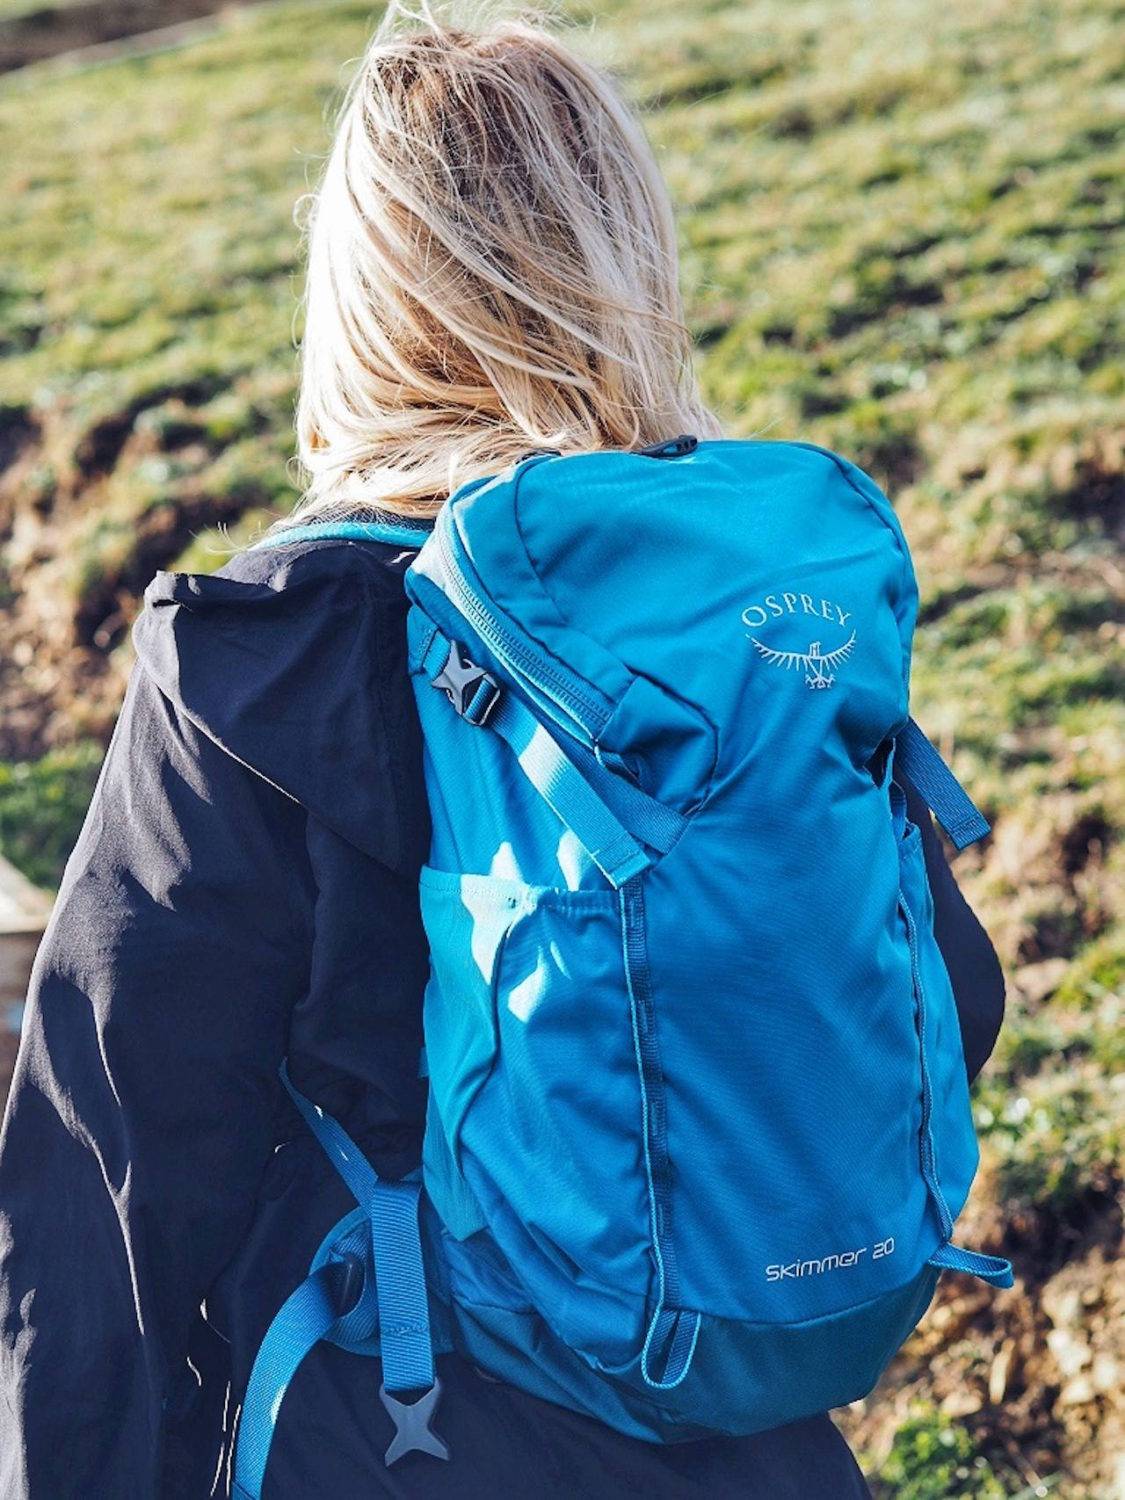 Osprey Skimmer 20 Review: What To Look For In A Ladies Backpack